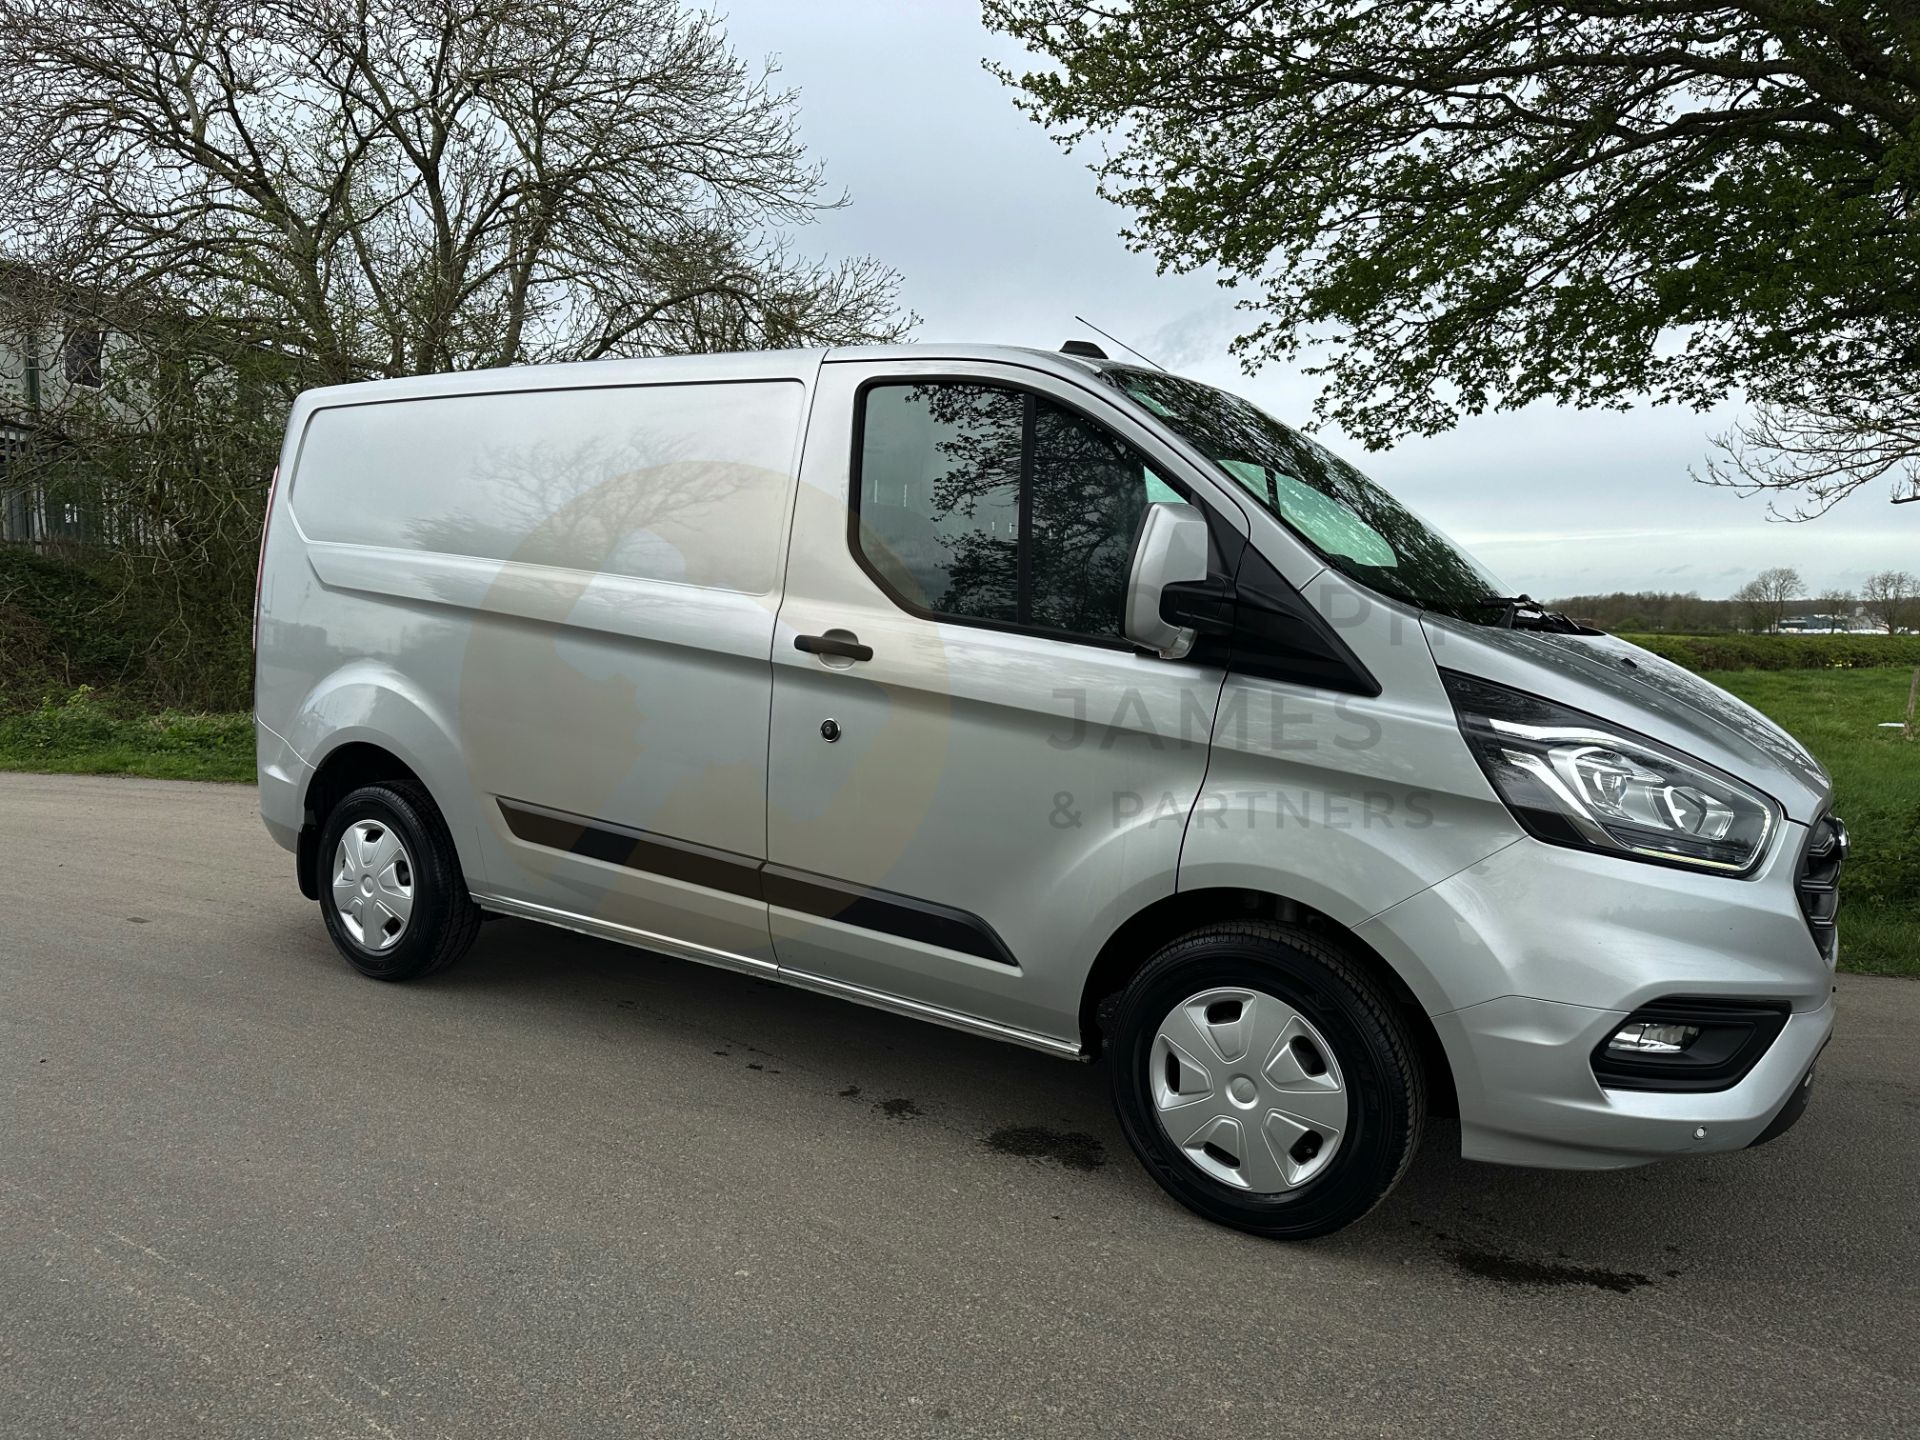 (ON SALE) FORD TRANSIT CUSTOM "TREND" 2.0TDCI (130) 20 REG -1 OWNER- SILVER -GREAT SPEC -LOW MILEAGE - Image 2 of 38